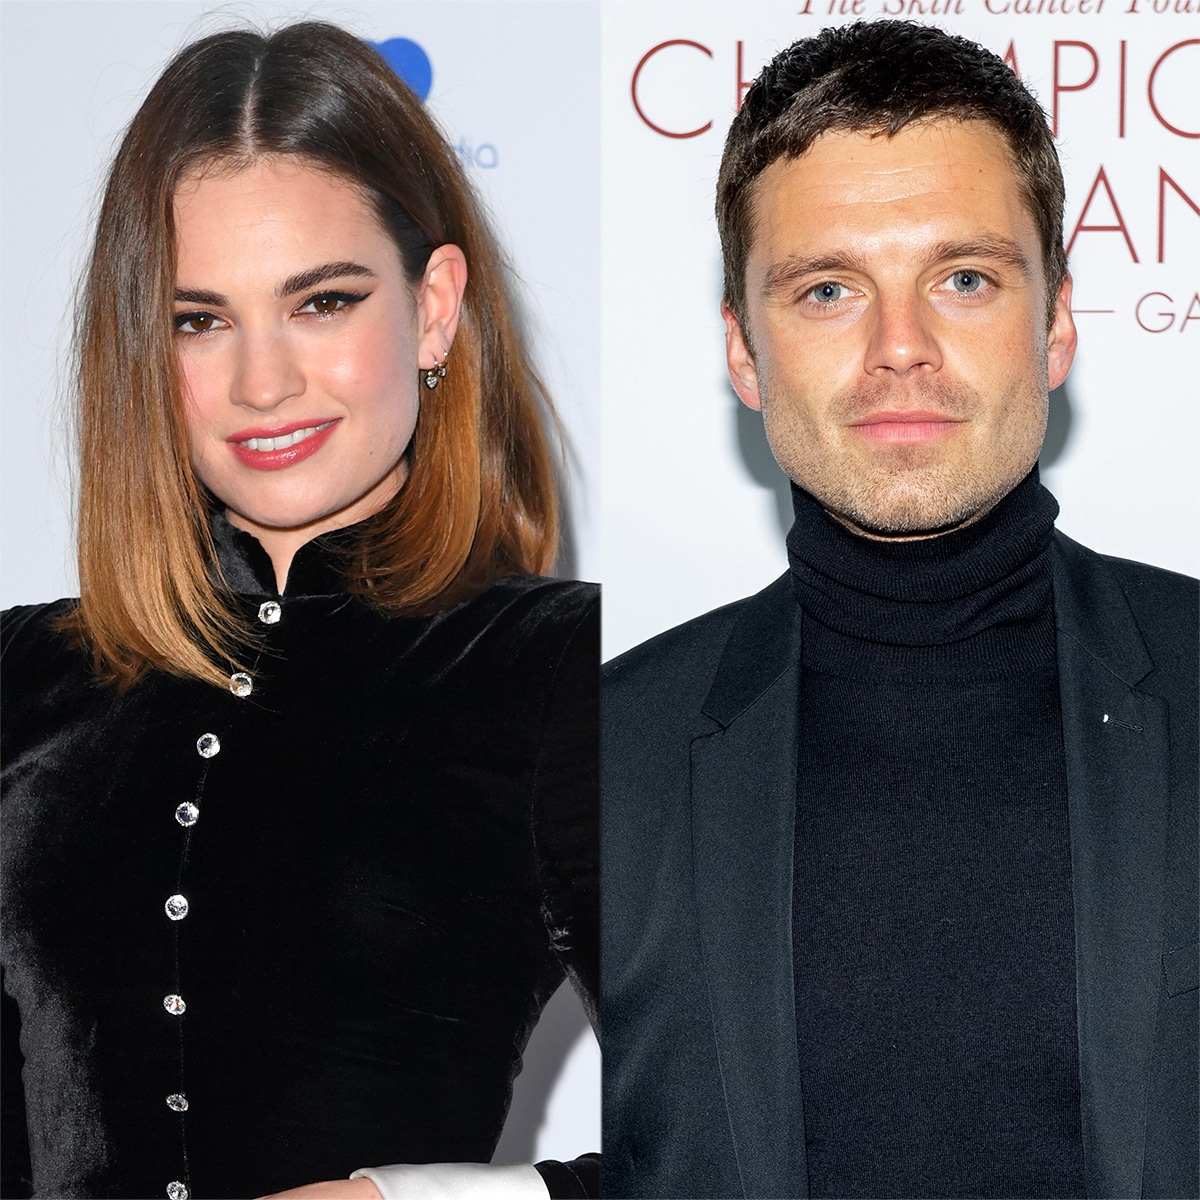 Lily James and Sebastian Stan to Play Pam Anderson and Tommy Lee - E! Online